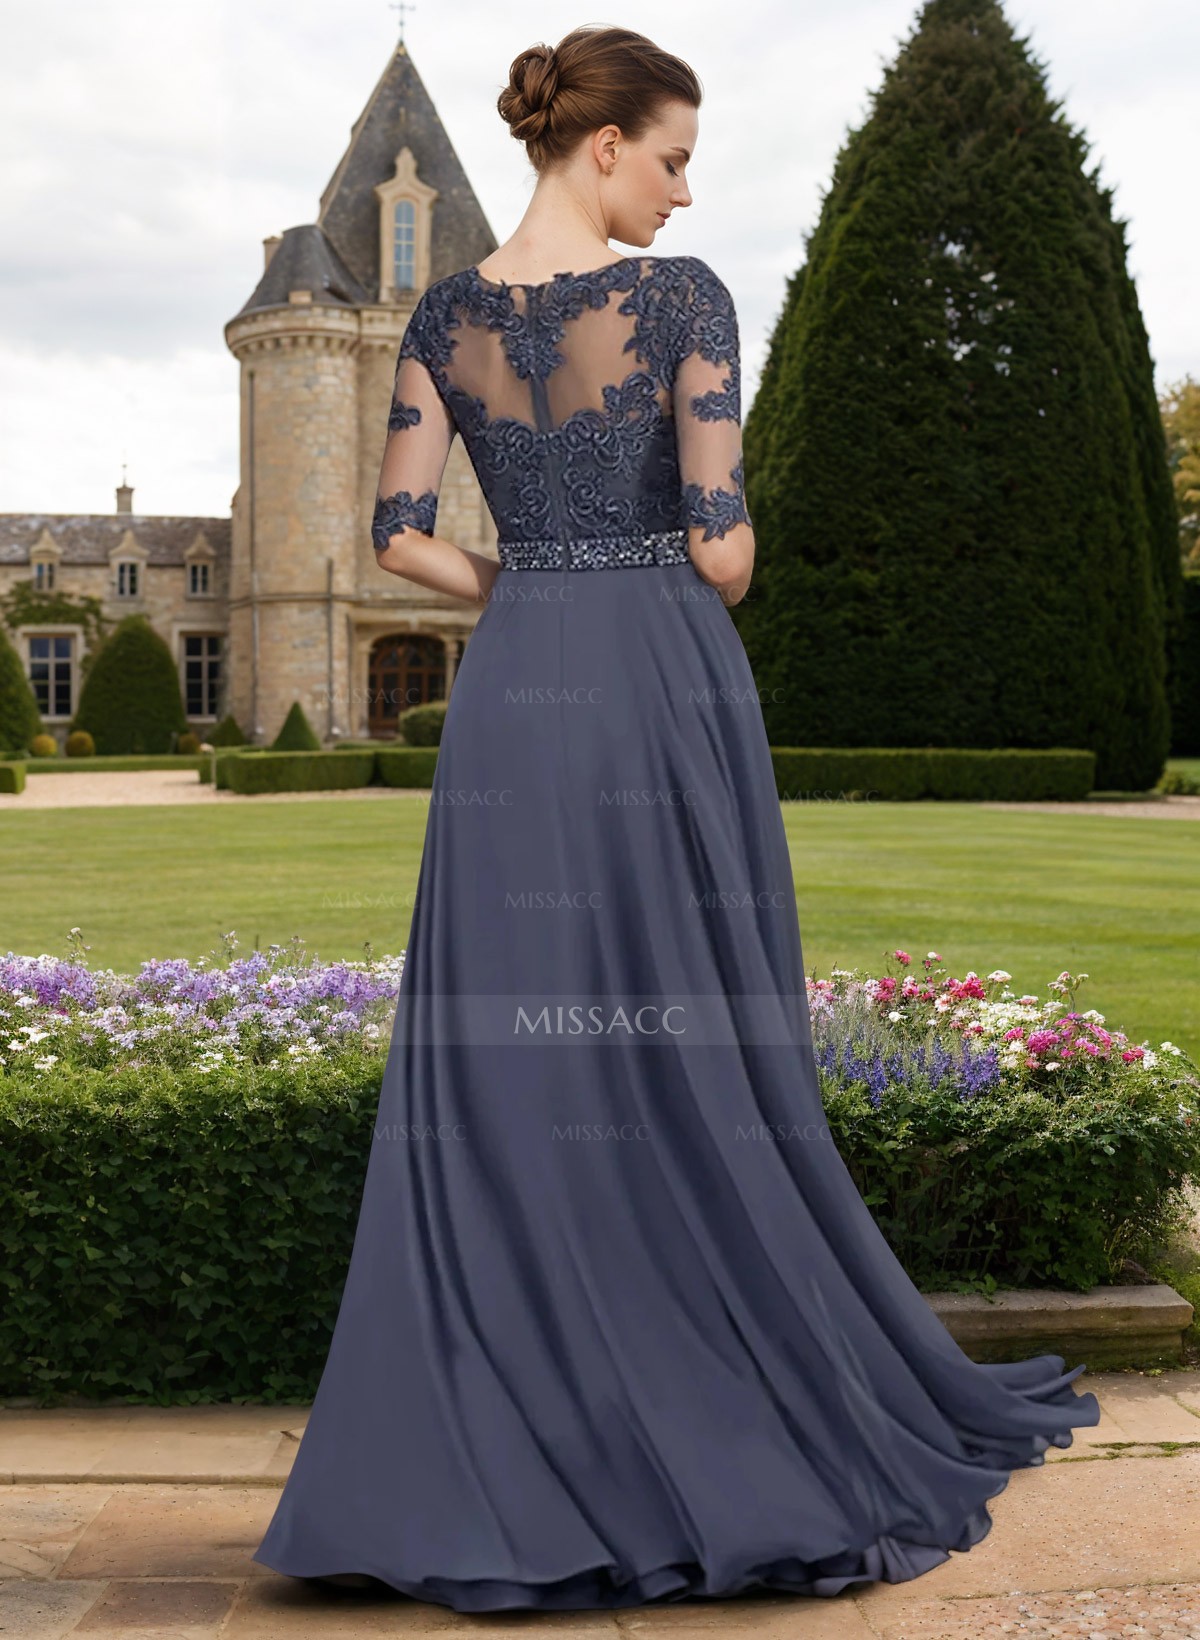 A-Line Illusion Neck 3/4 Sleeves Floor-Length Chiffon/Lace Mother Of The Bride Dresses With Lace